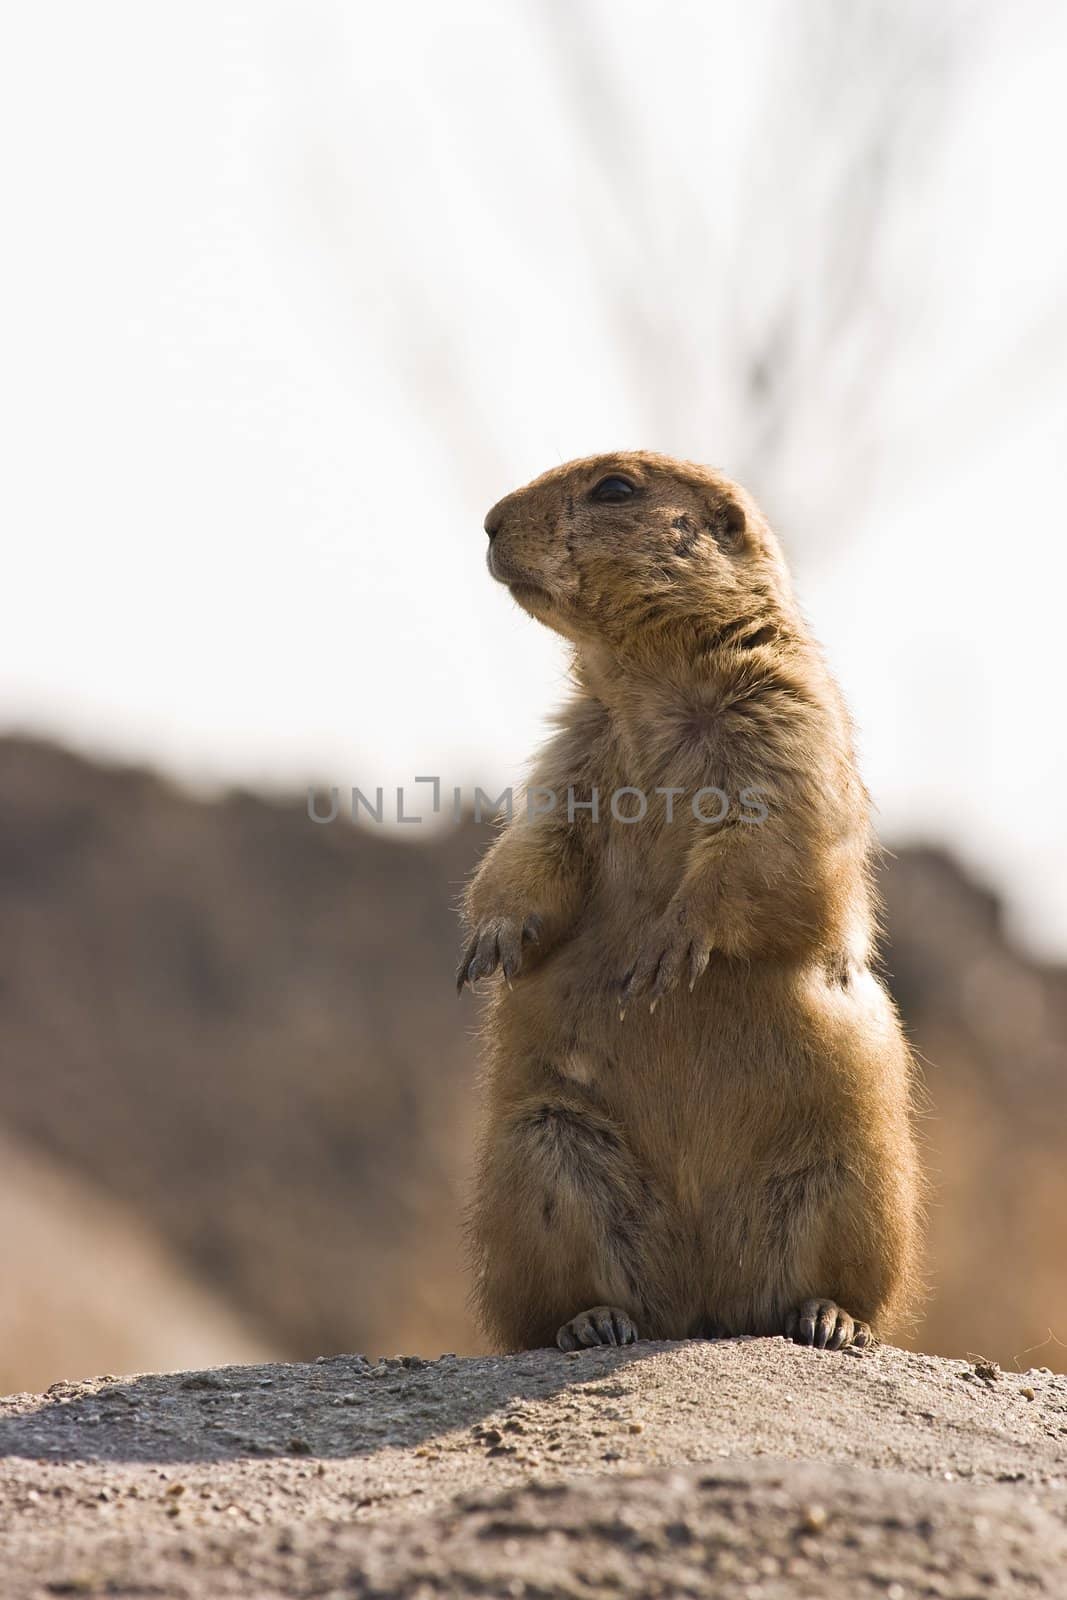 small, burrowing rodents native to the grasslands of North America.